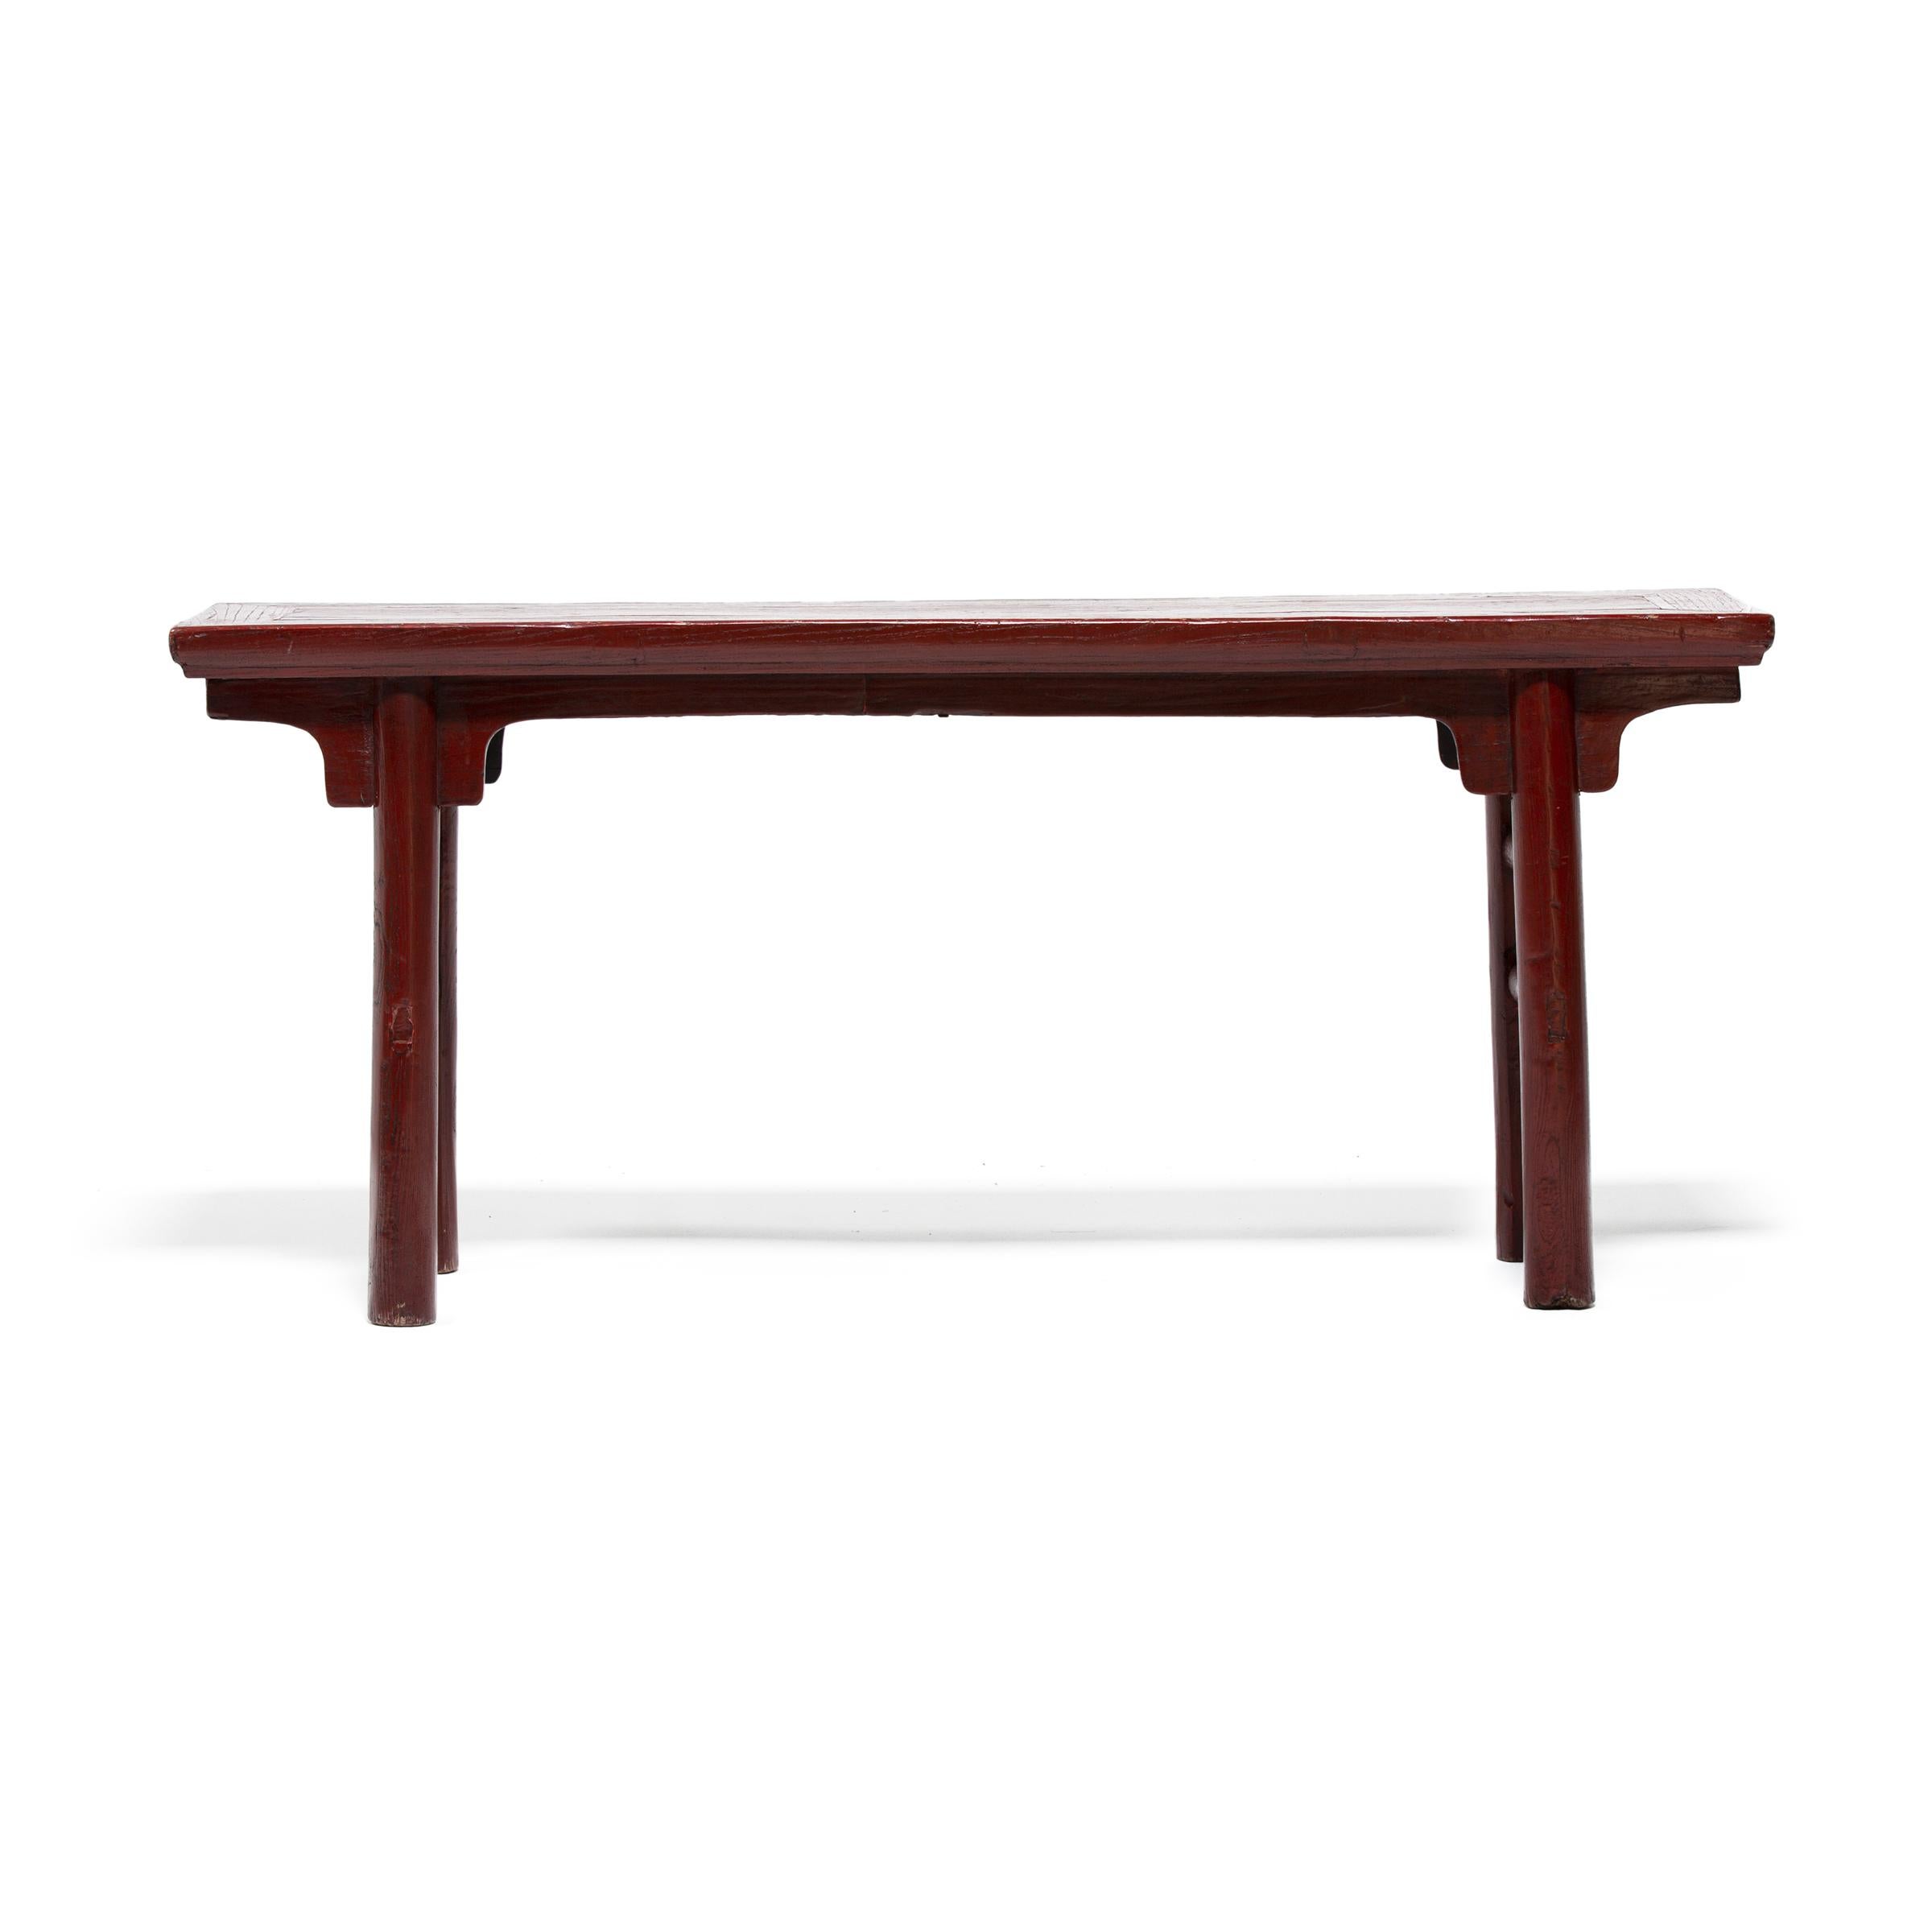 This low, early 20th century gate bench would have originally resided in the courtyard of a Qing-dynasty home to provide much-needed outdoor seating on hot summer days. The bench is designed in a classical Ming style, with a floating panel top,